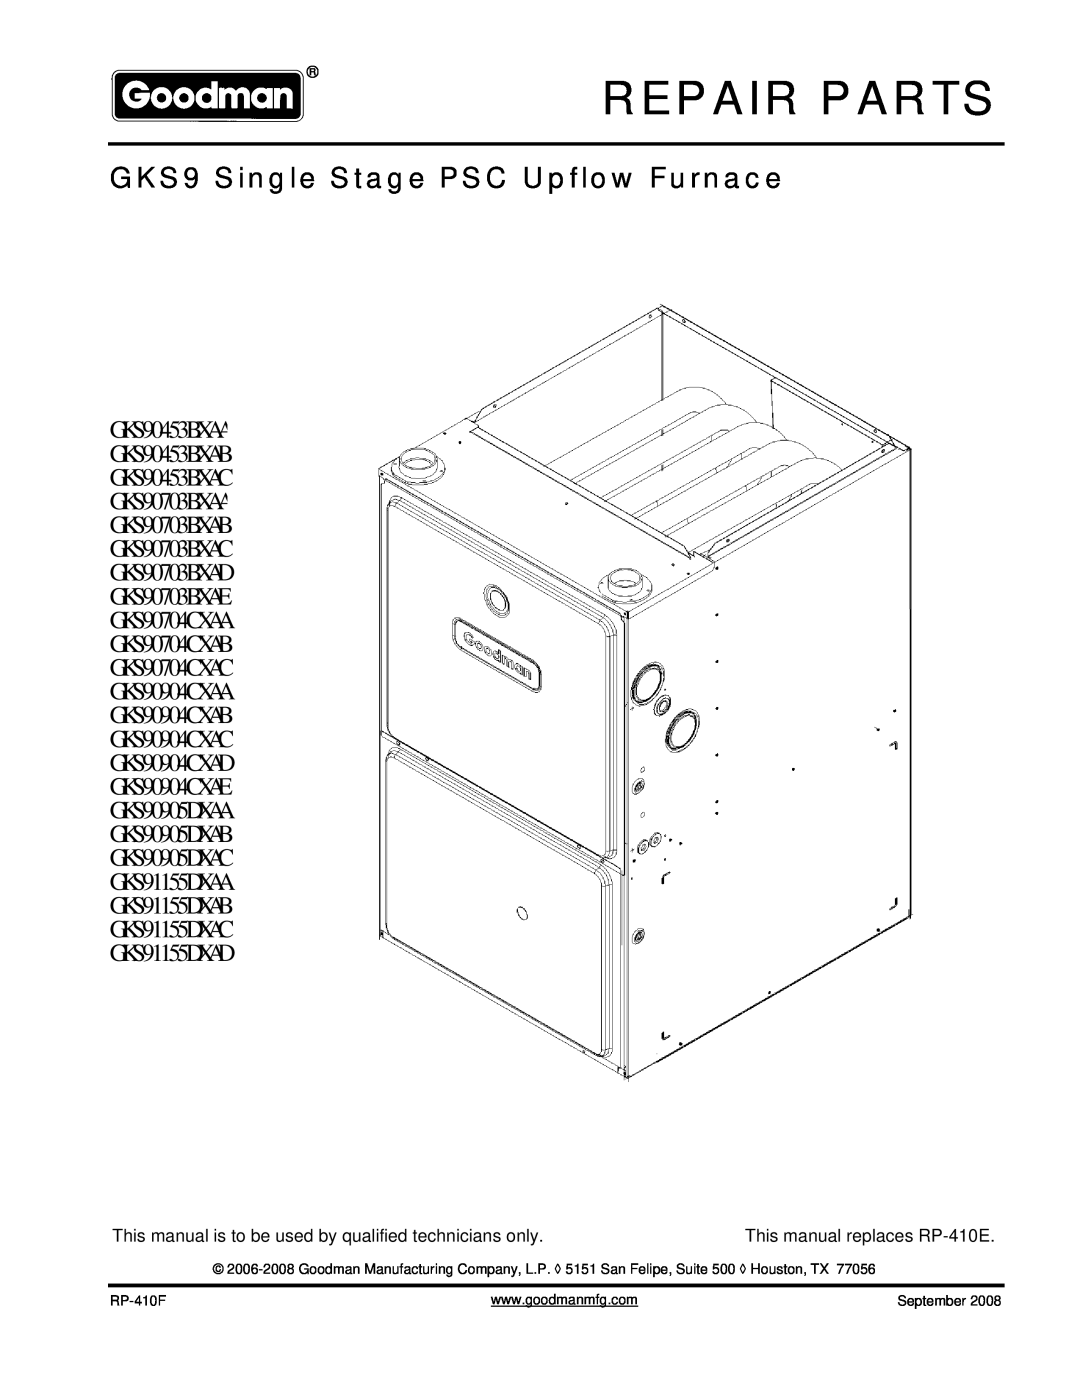 Goodman Mfg GKS90904CXAB, GKS90704CXAB, GKS90904CXAD, GKS90704CXAA manual Repair Parts, GKS9 Single Stage PSC Upflow Furnace 